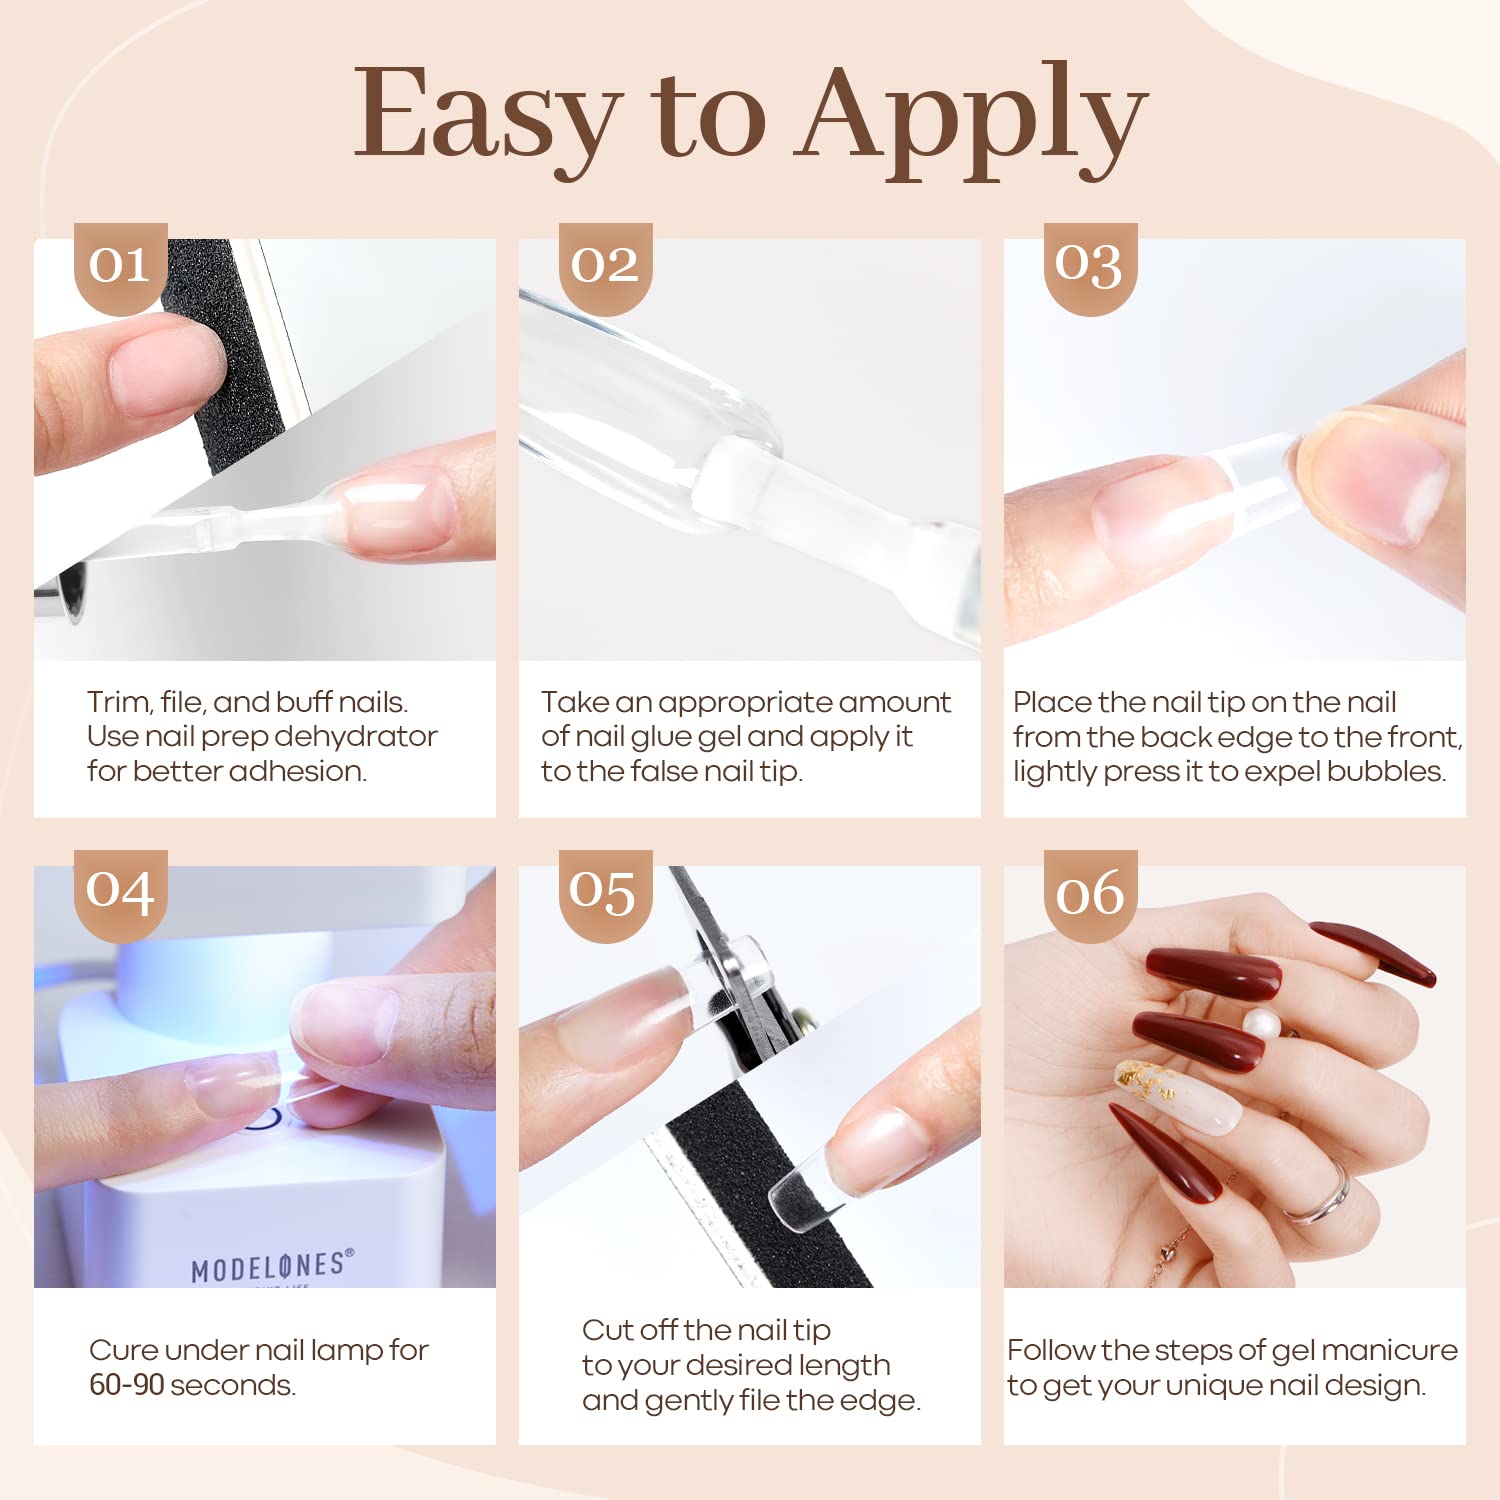 4-in-1 Nail Glue and Mini Lamp with 500Pcs Nail Tips Kit【Coffin/Square/Almond】